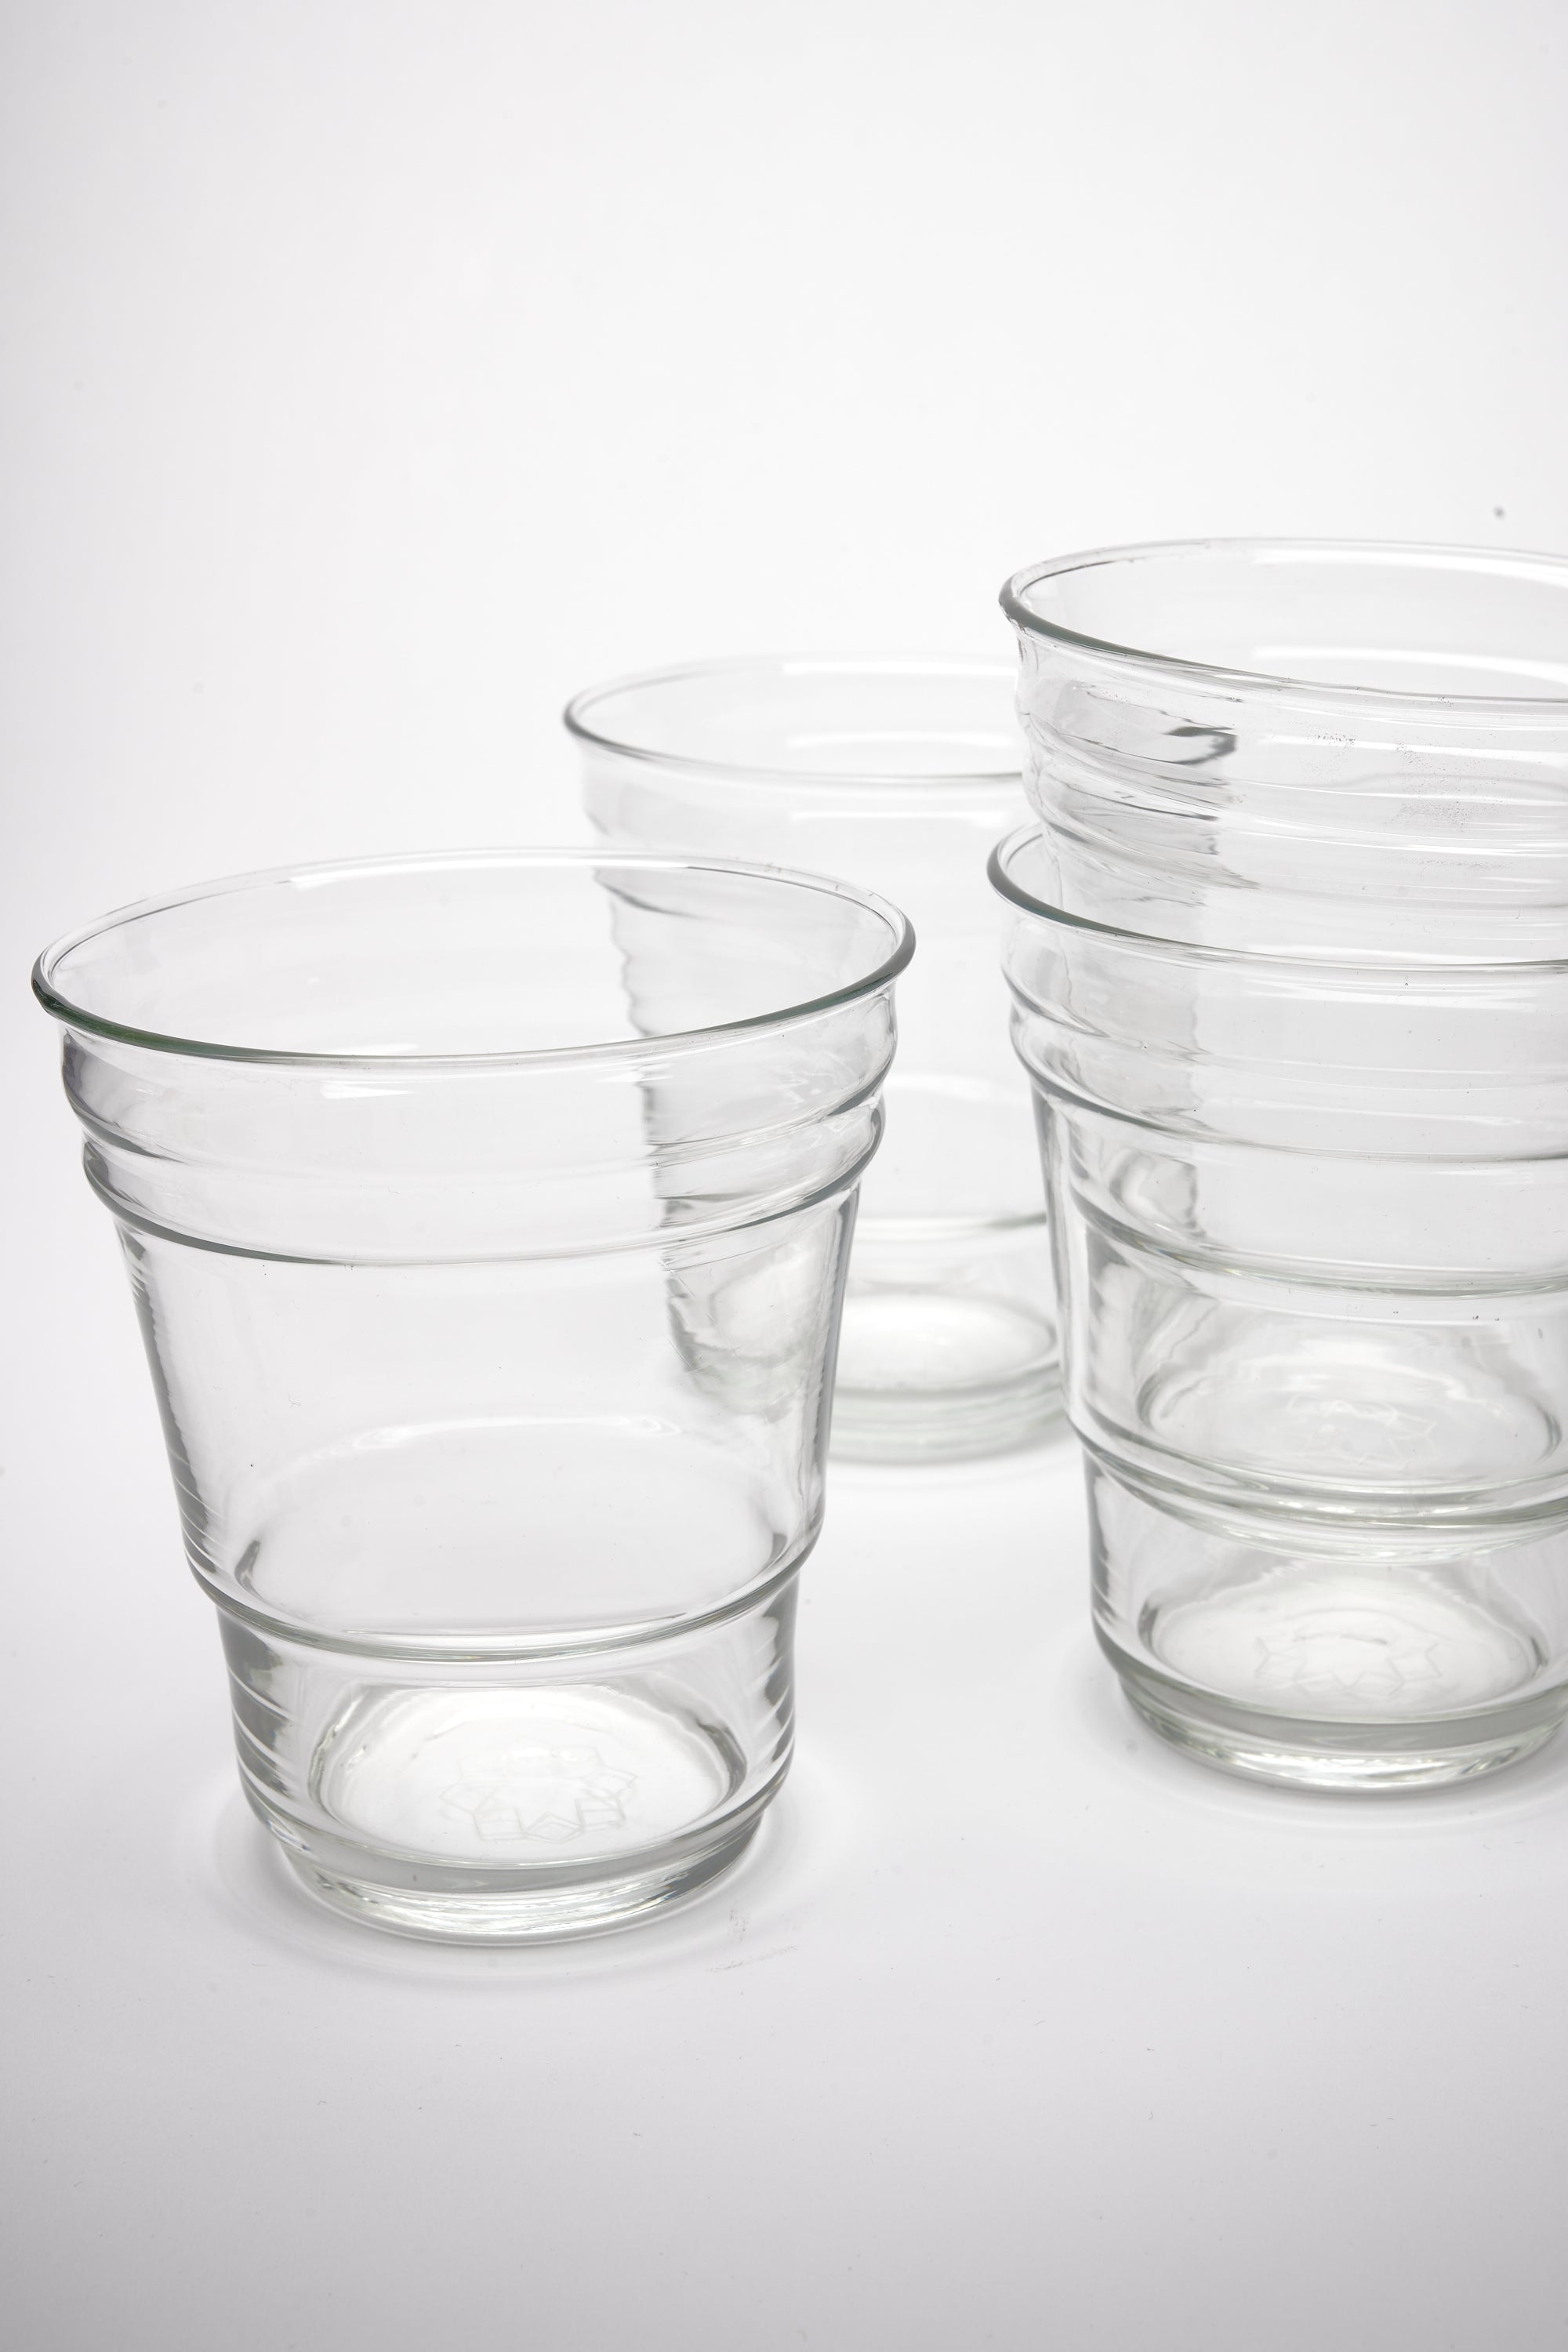 Fantastic-Not-Plastic Tall Glasses in Clear